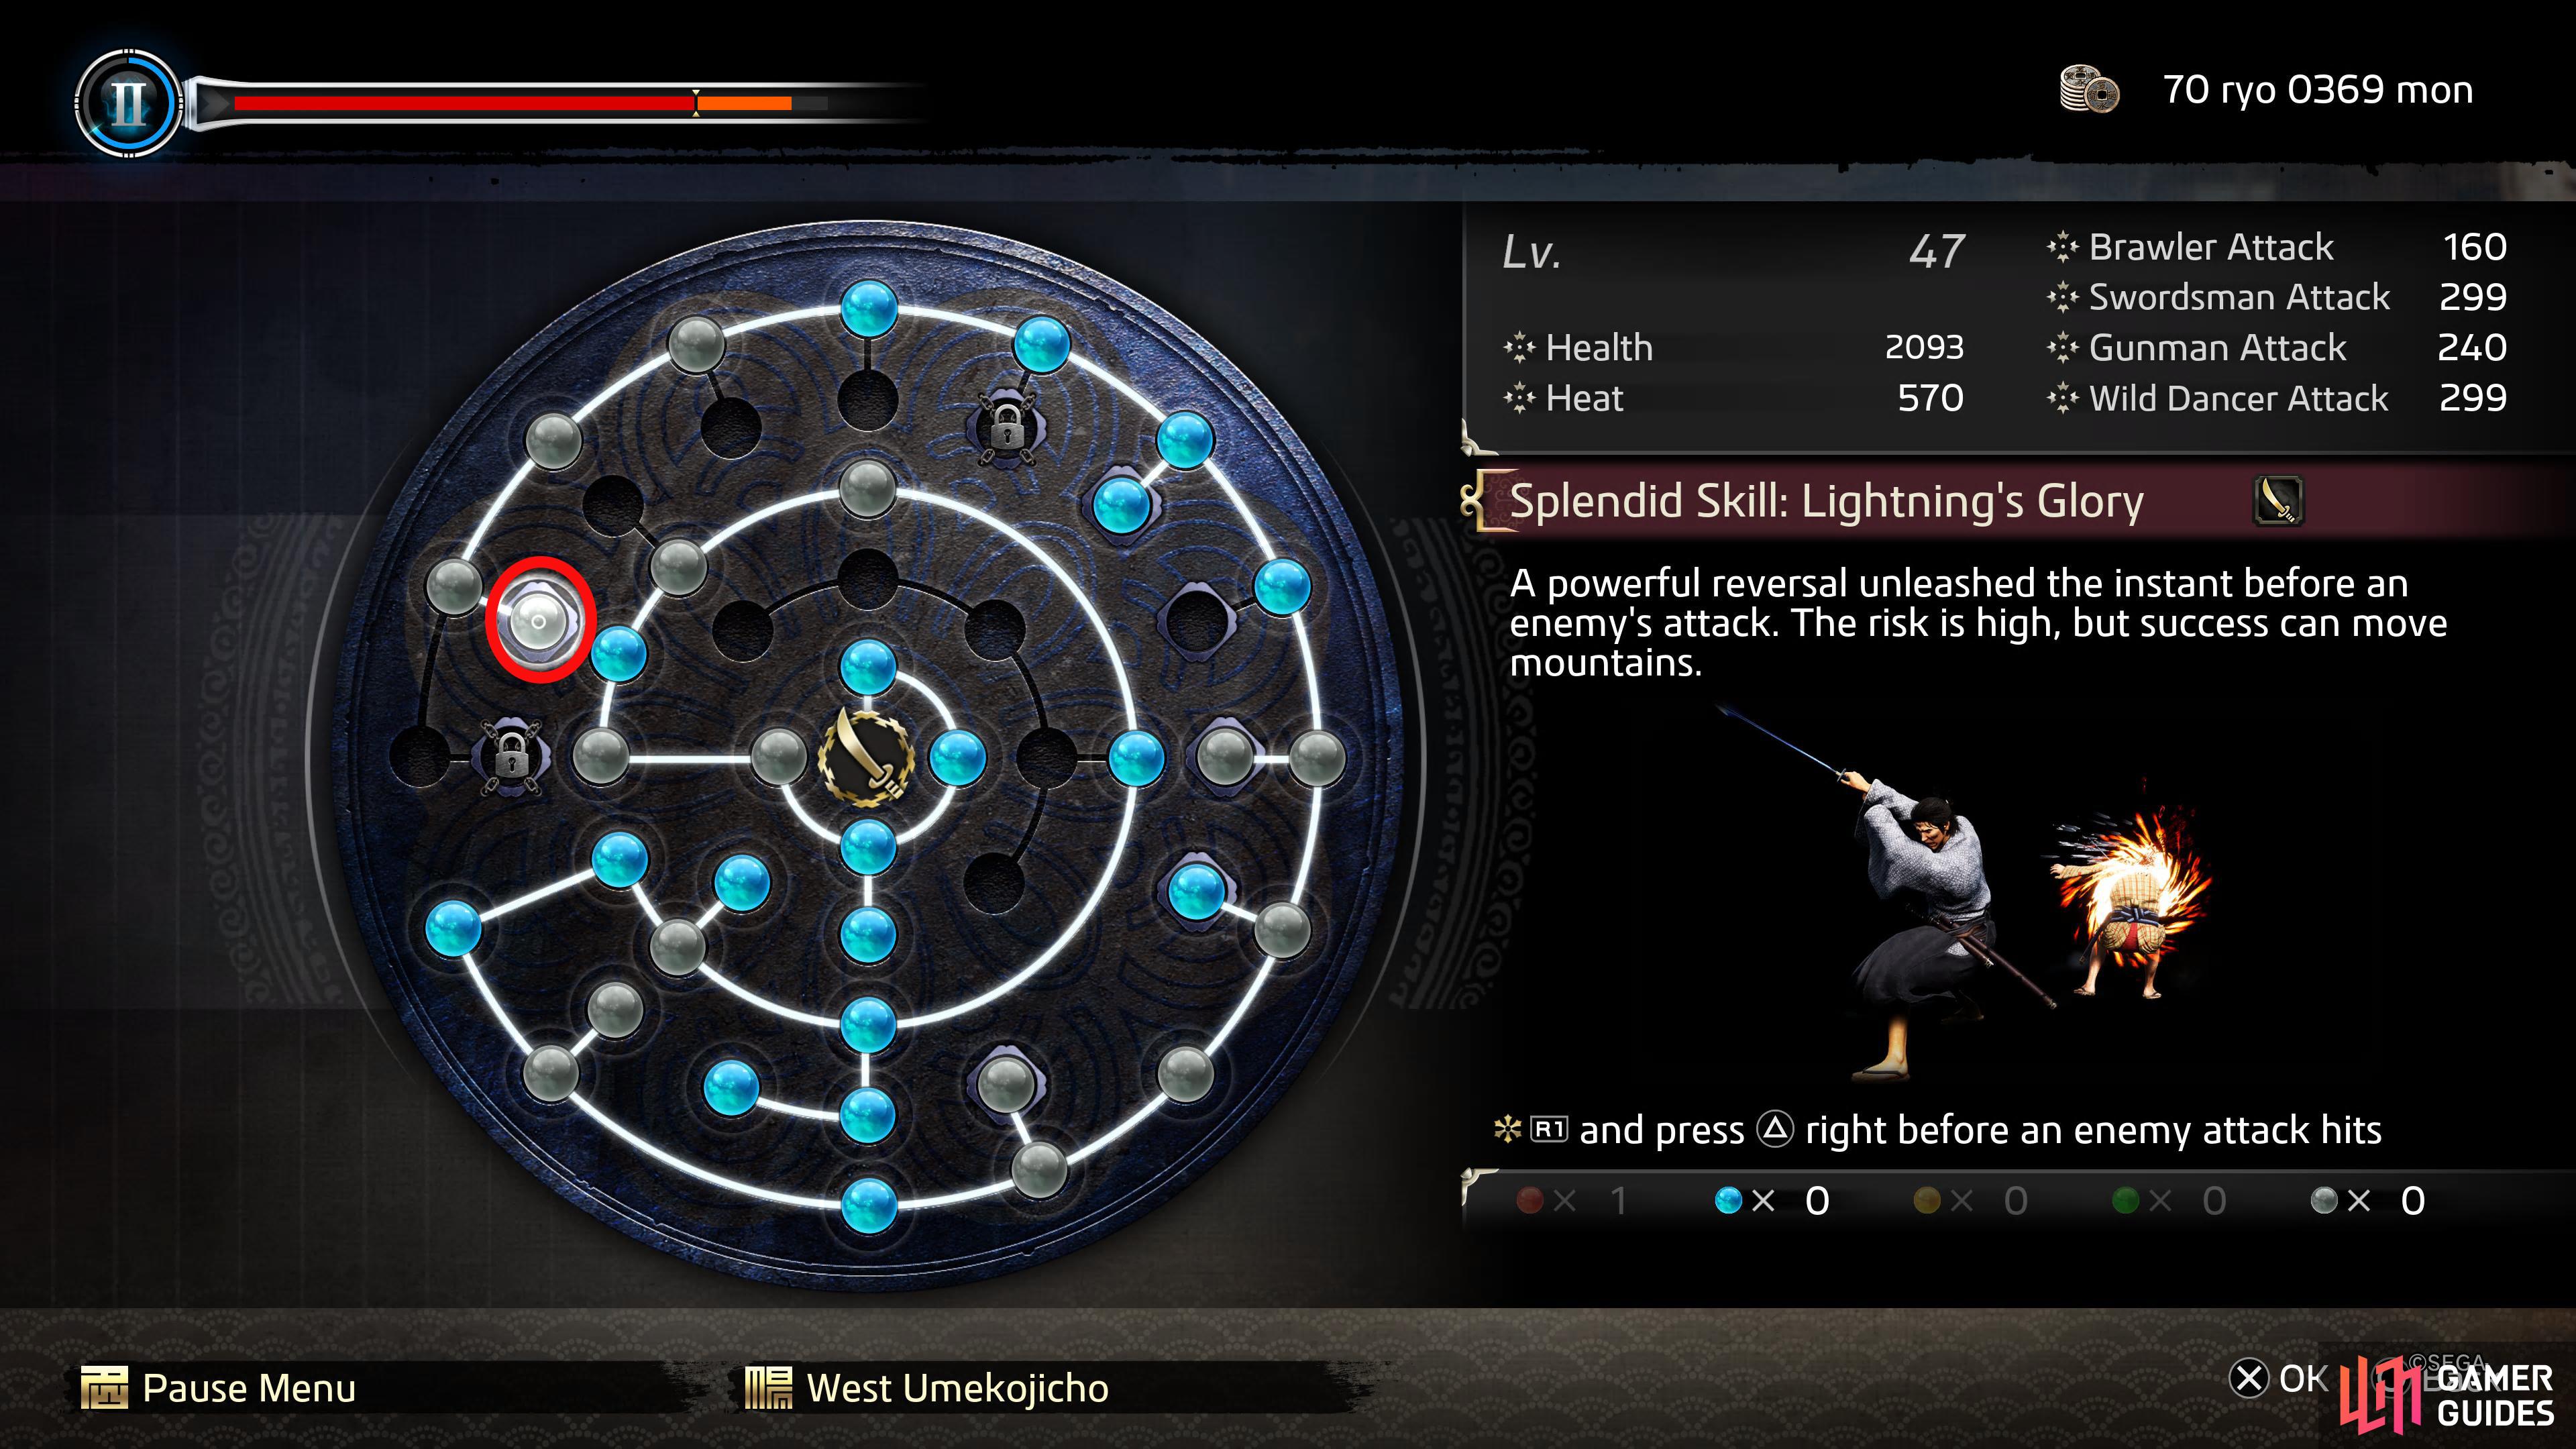 Here is where Lightning's Glory appears on the Ability Wheel.